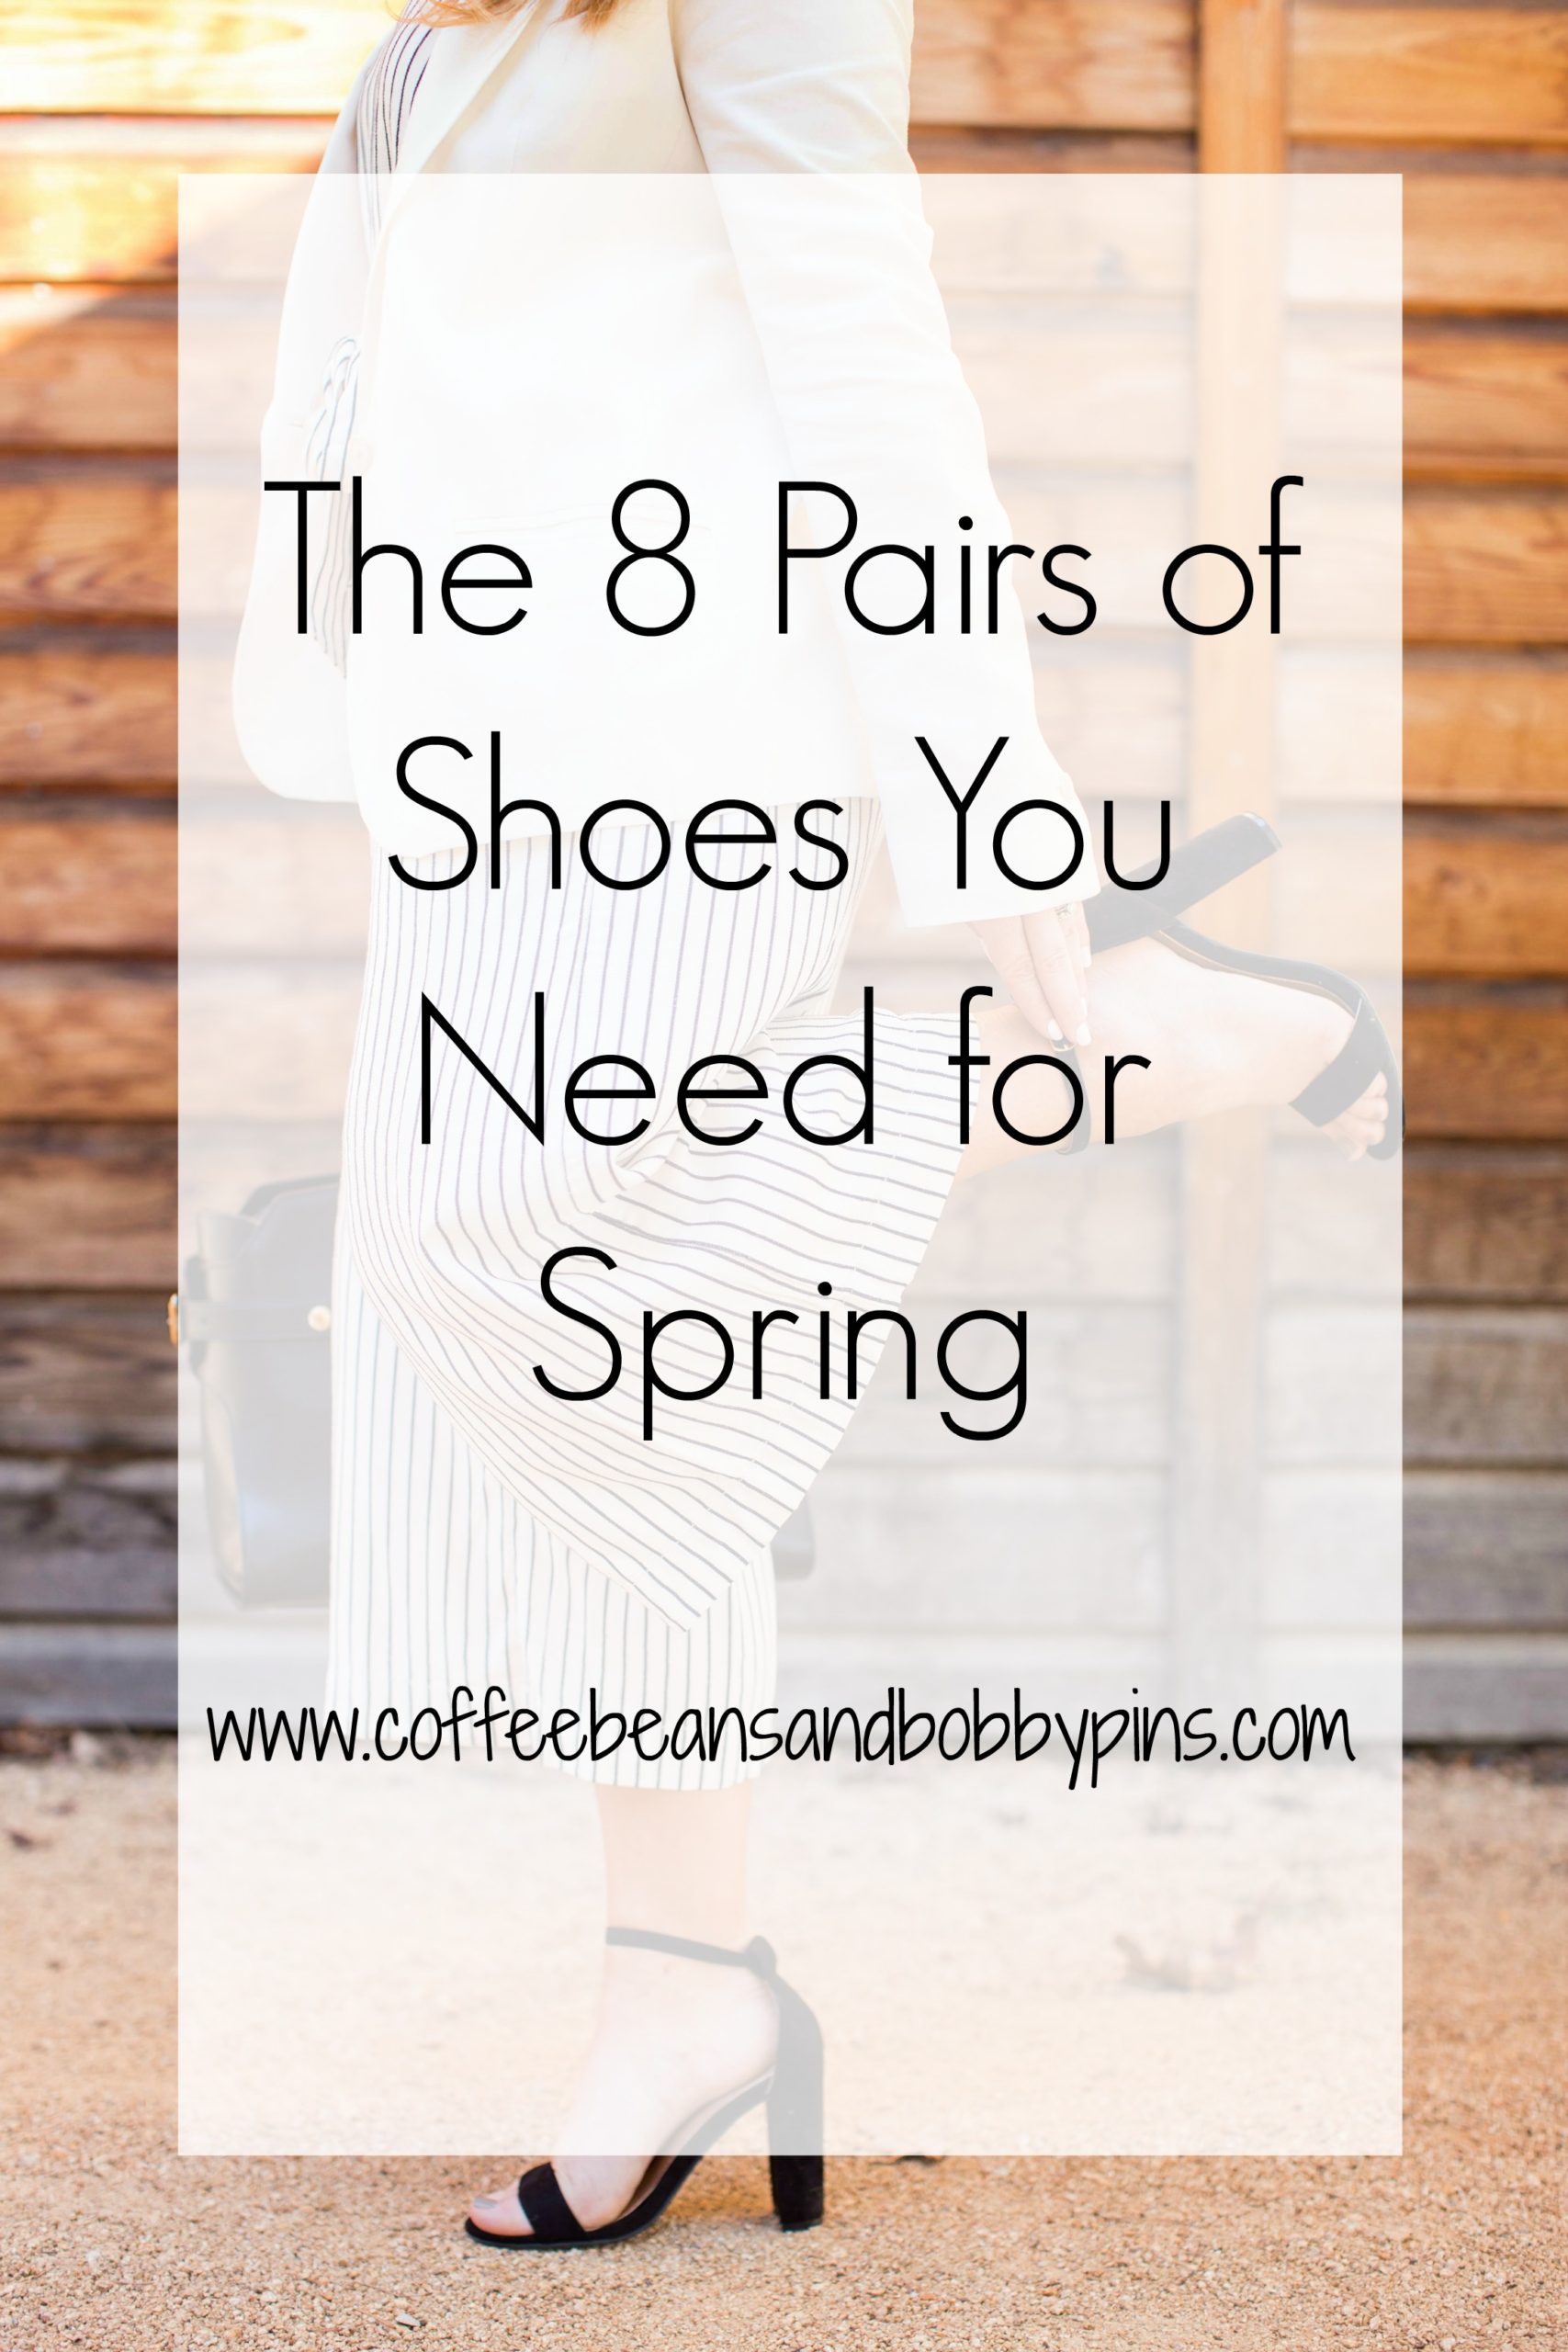 The 8 Pairs of Shoes You Need for Spring